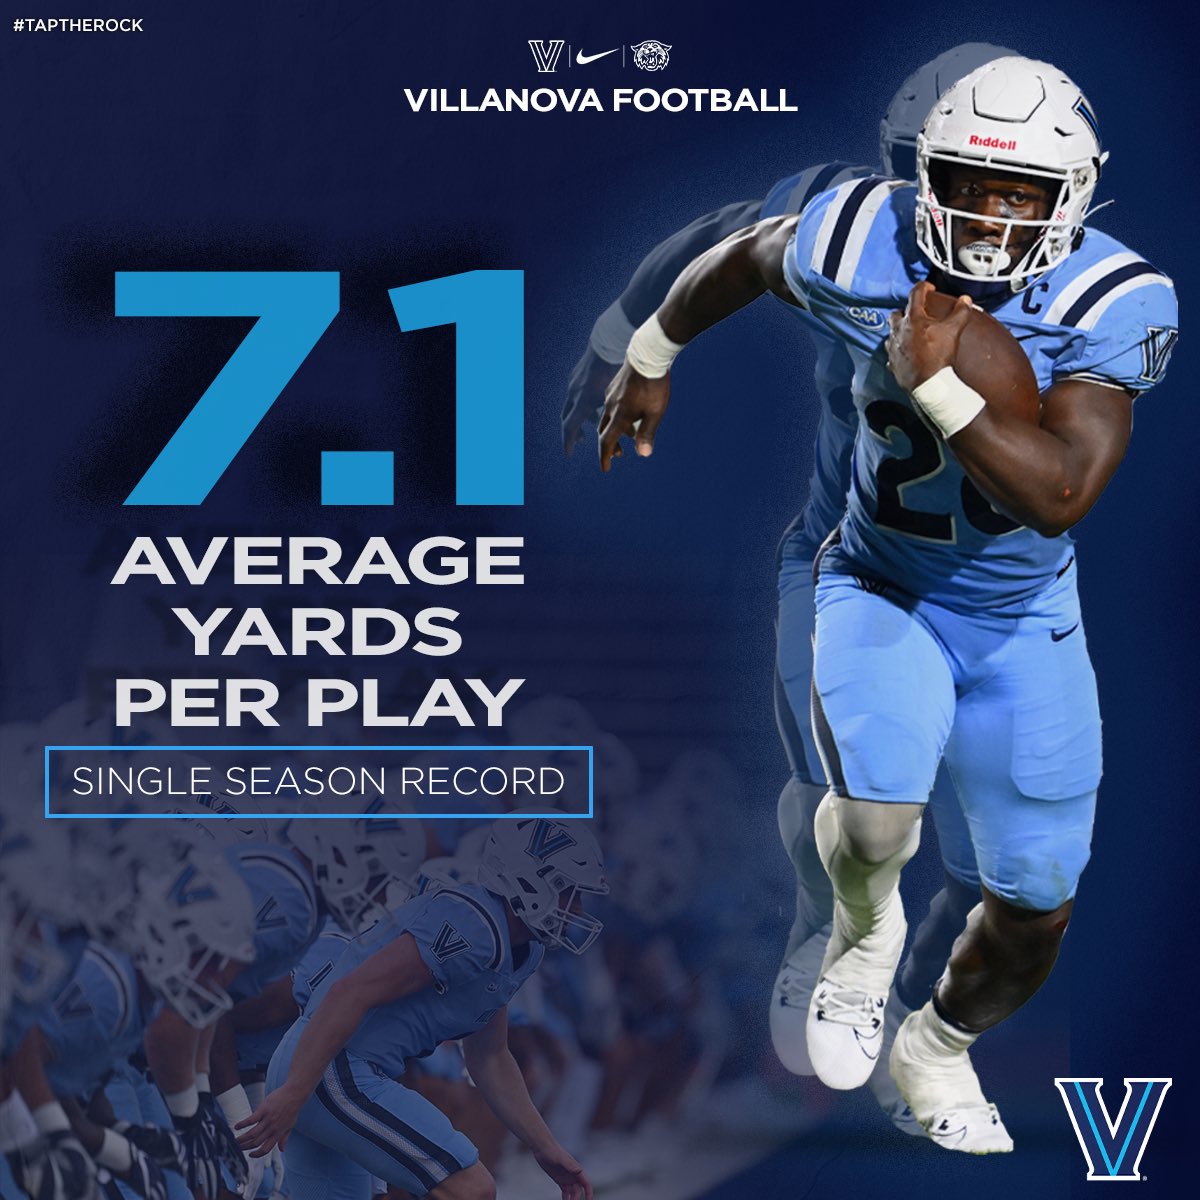 Recapping the 2023 season: 𝙏𝙚𝙖𝙢 𝙨𝙞𝙣𝙜𝙡𝙚 𝙨𝙚𝙖𝙨𝙤𝙣 𝙧𝙚𝙘𝙤𝙧𝙙 For the first time the Wildcats averaged more than seven yards per play in a season! 💪